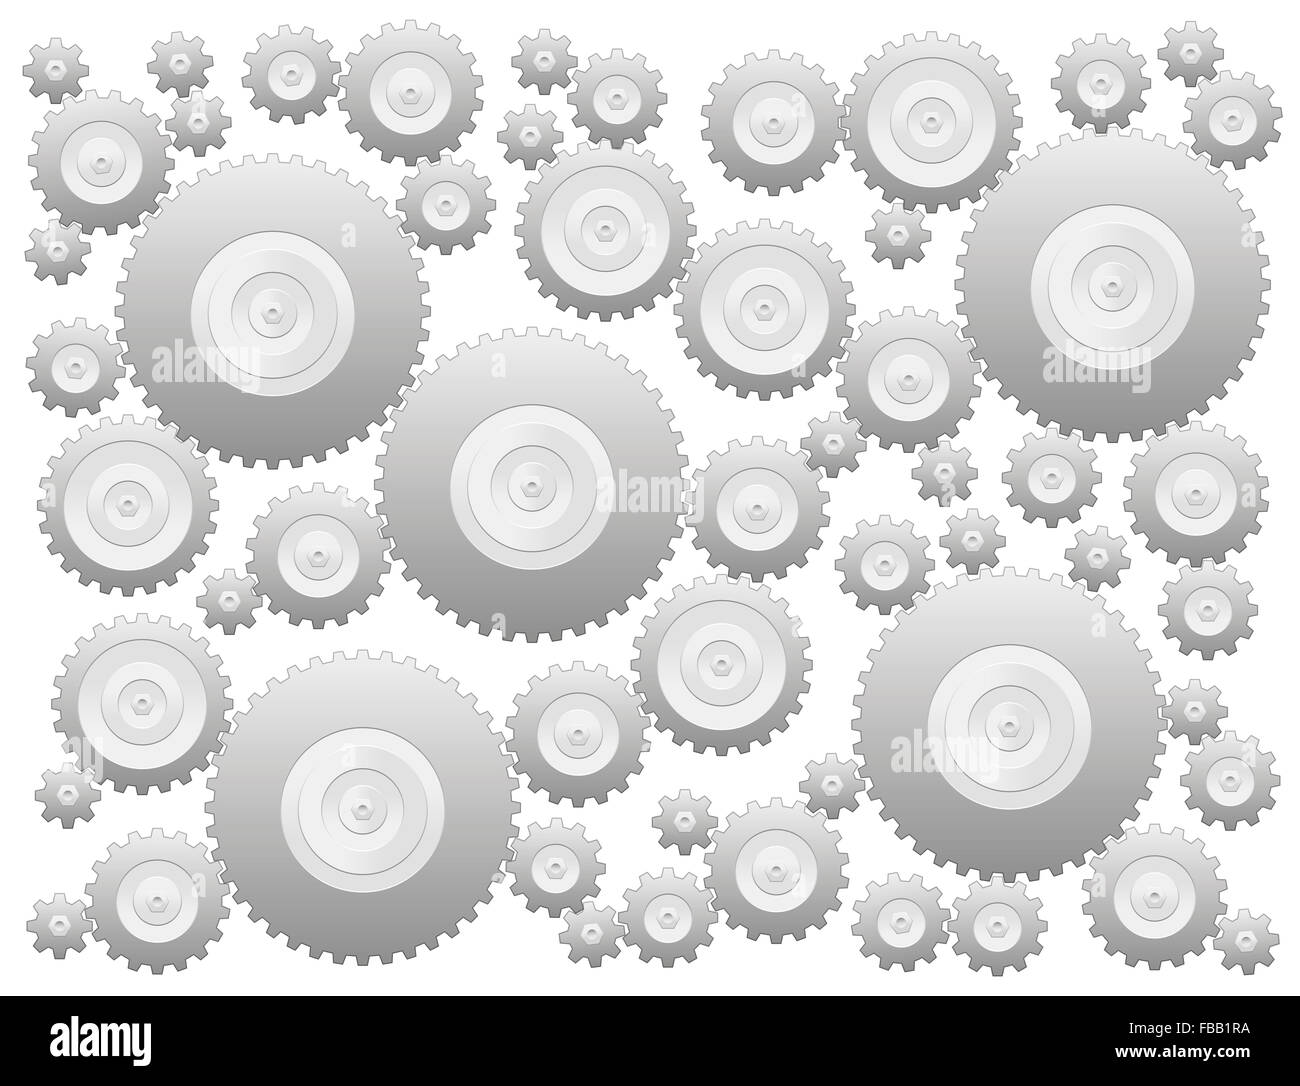 Cogs - gear wheels - illustration over white background. Stock Photo